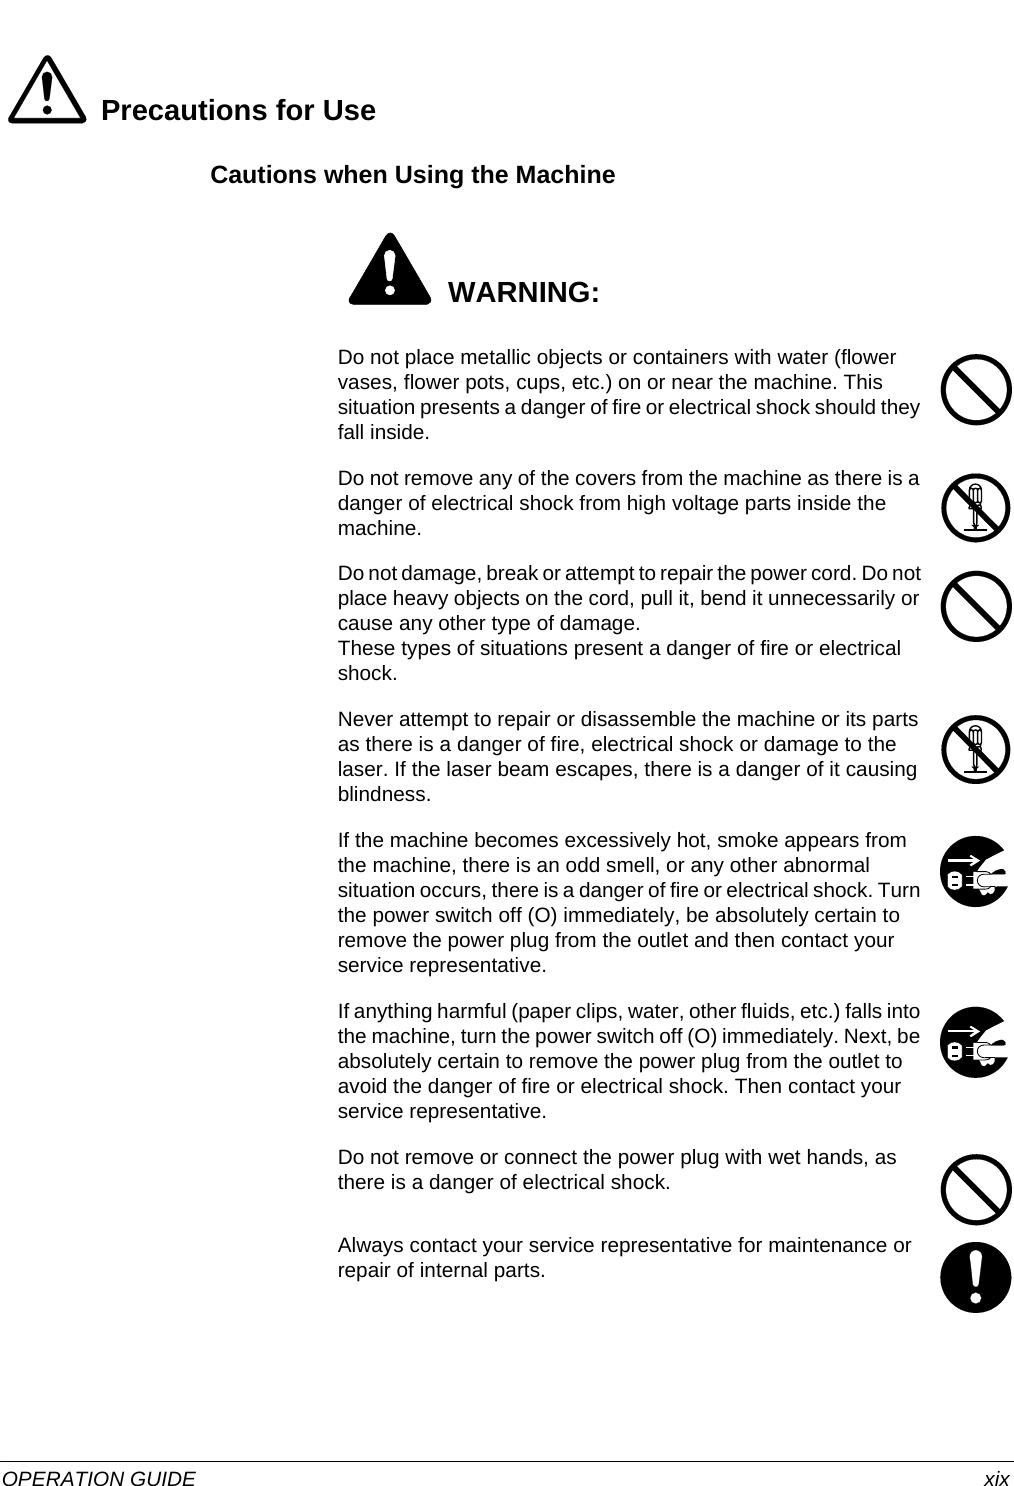  OPERATION GUIDE xixPrecautions for UseCautions when Using the Machine WARNING:Do not place metallic objects or containers with water (flower vases, flower pots, cups, etc.) on or near the machine. This situation presents a danger of fire or electrical shock should they fall inside.Do not remove any of the covers from the machine as there is a danger of electrical shock from high voltage parts inside the machine. Do not damage, break or attempt to repair the power cord. Do not place heavy objects on the cord, pull it, bend it unnecessarily or cause any other type of damage.These types of situations present a danger of fire or electrical shock. Never attempt to repair or disassemble the machine or its parts as there is a danger of fire, electrical shock or damage to the laser. If the laser beam escapes, there is a danger of it causing blindness.If the machine becomes excessively hot, smoke appears from the machine, there is an odd smell, or any other abnormal situation occurs, there is a danger of fire or electrical shock. Turn the power switch off (O) immediately, be absolutely certain to remove the power plug from the outlet and then contact your service representative.If anything harmful (paper clips, water, other fluids, etc.) falls into the machine, turn the power switch off (O) immediately. Next, be absolutely certain to remove the power plug from the outlet to avoid the danger of fire or electrical shock. Then contact your service representative.Do not remove or connect the power plug with wet hands, as there is a danger of electrical shock. Always contact your service representative for maintenance or repair of internal parts.